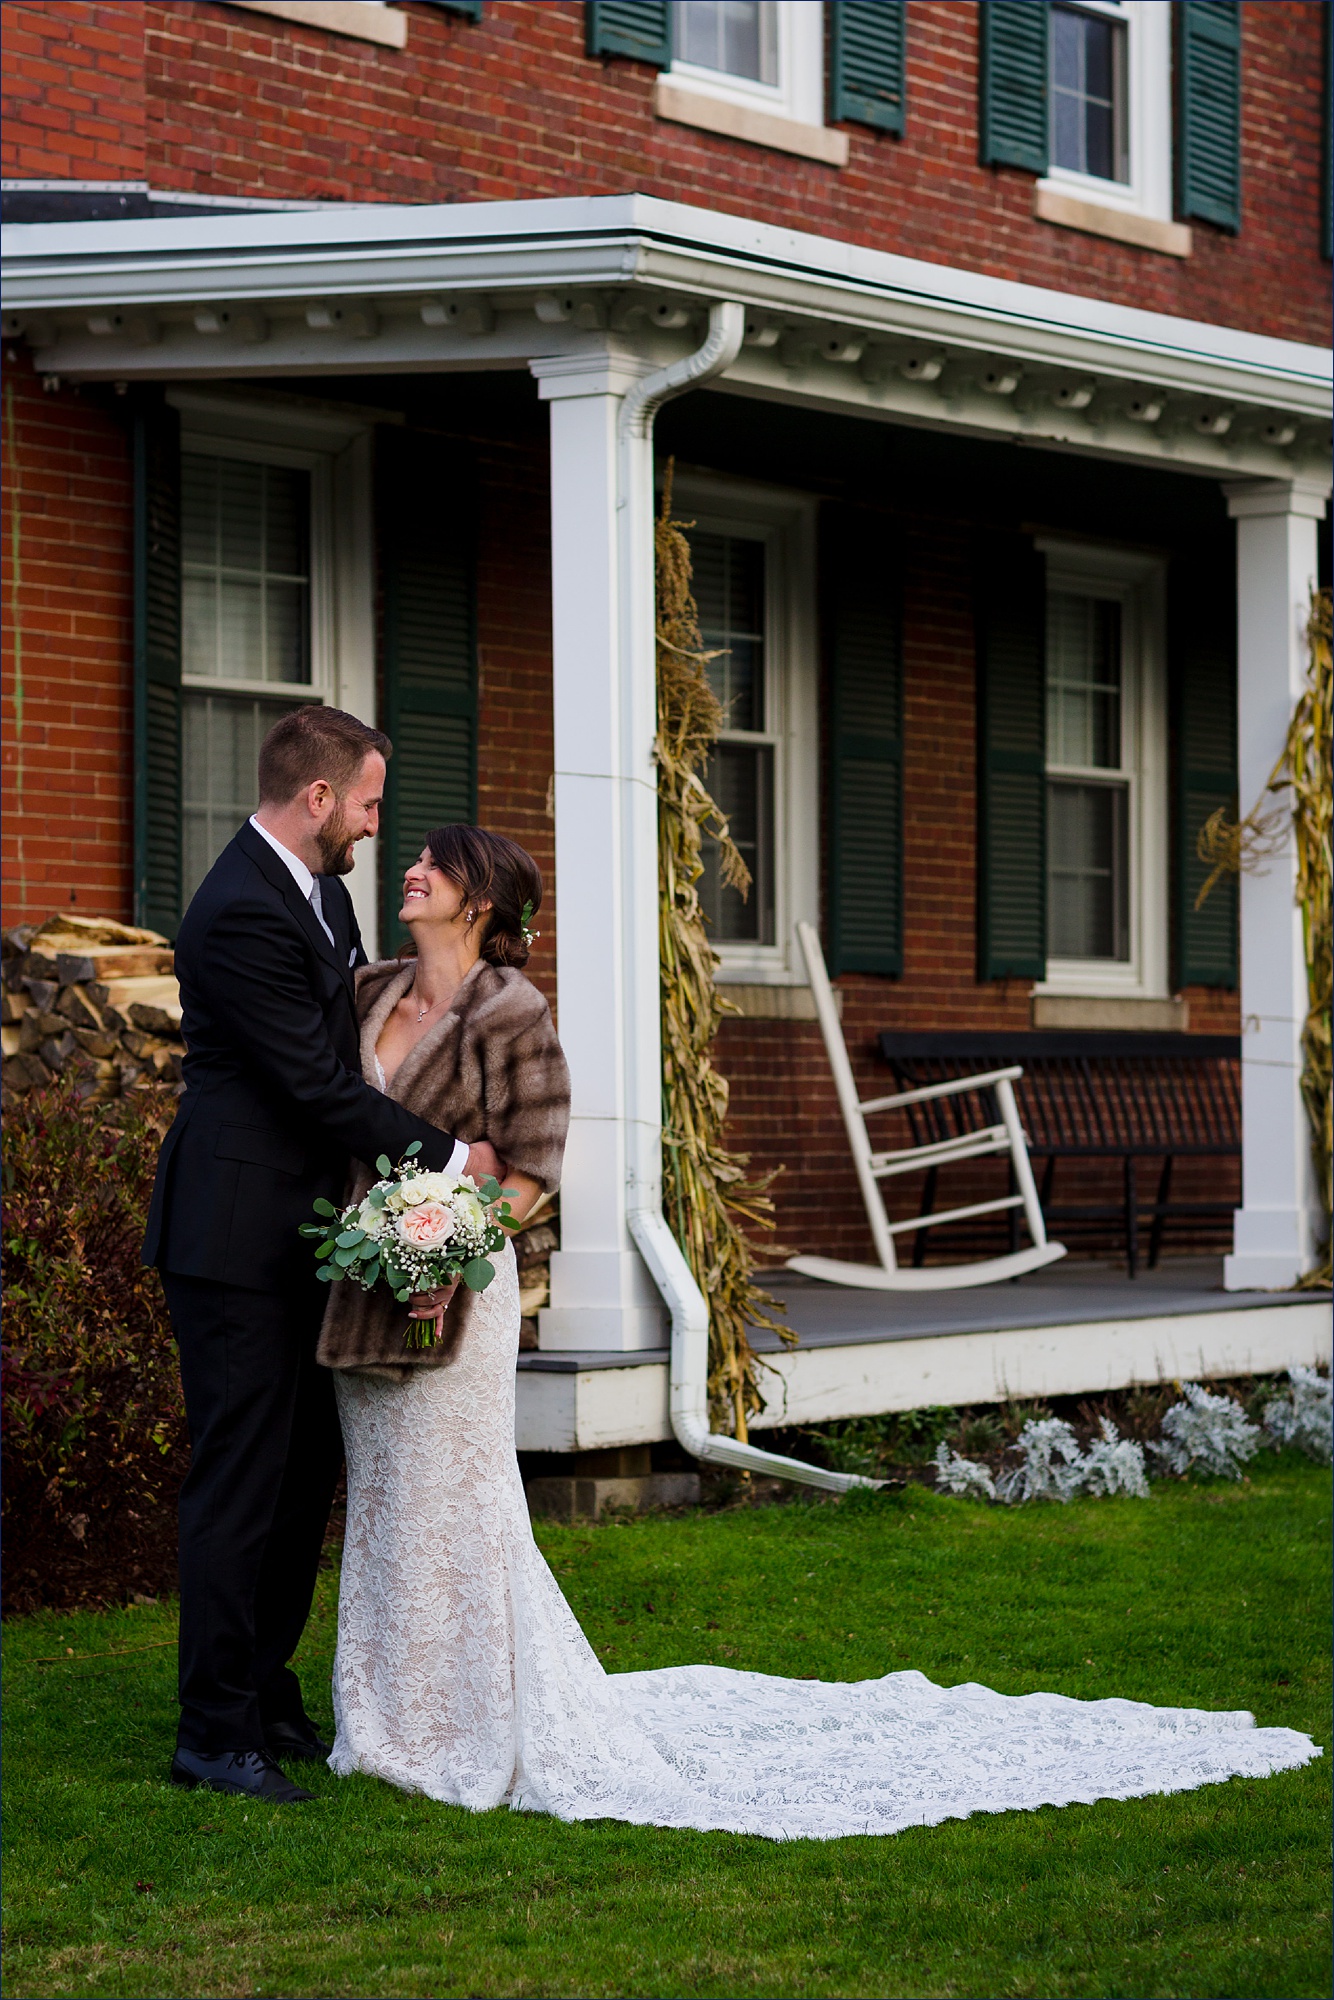 The couple stand together on their fall wedding day at The Red Barn at Outlook Farm